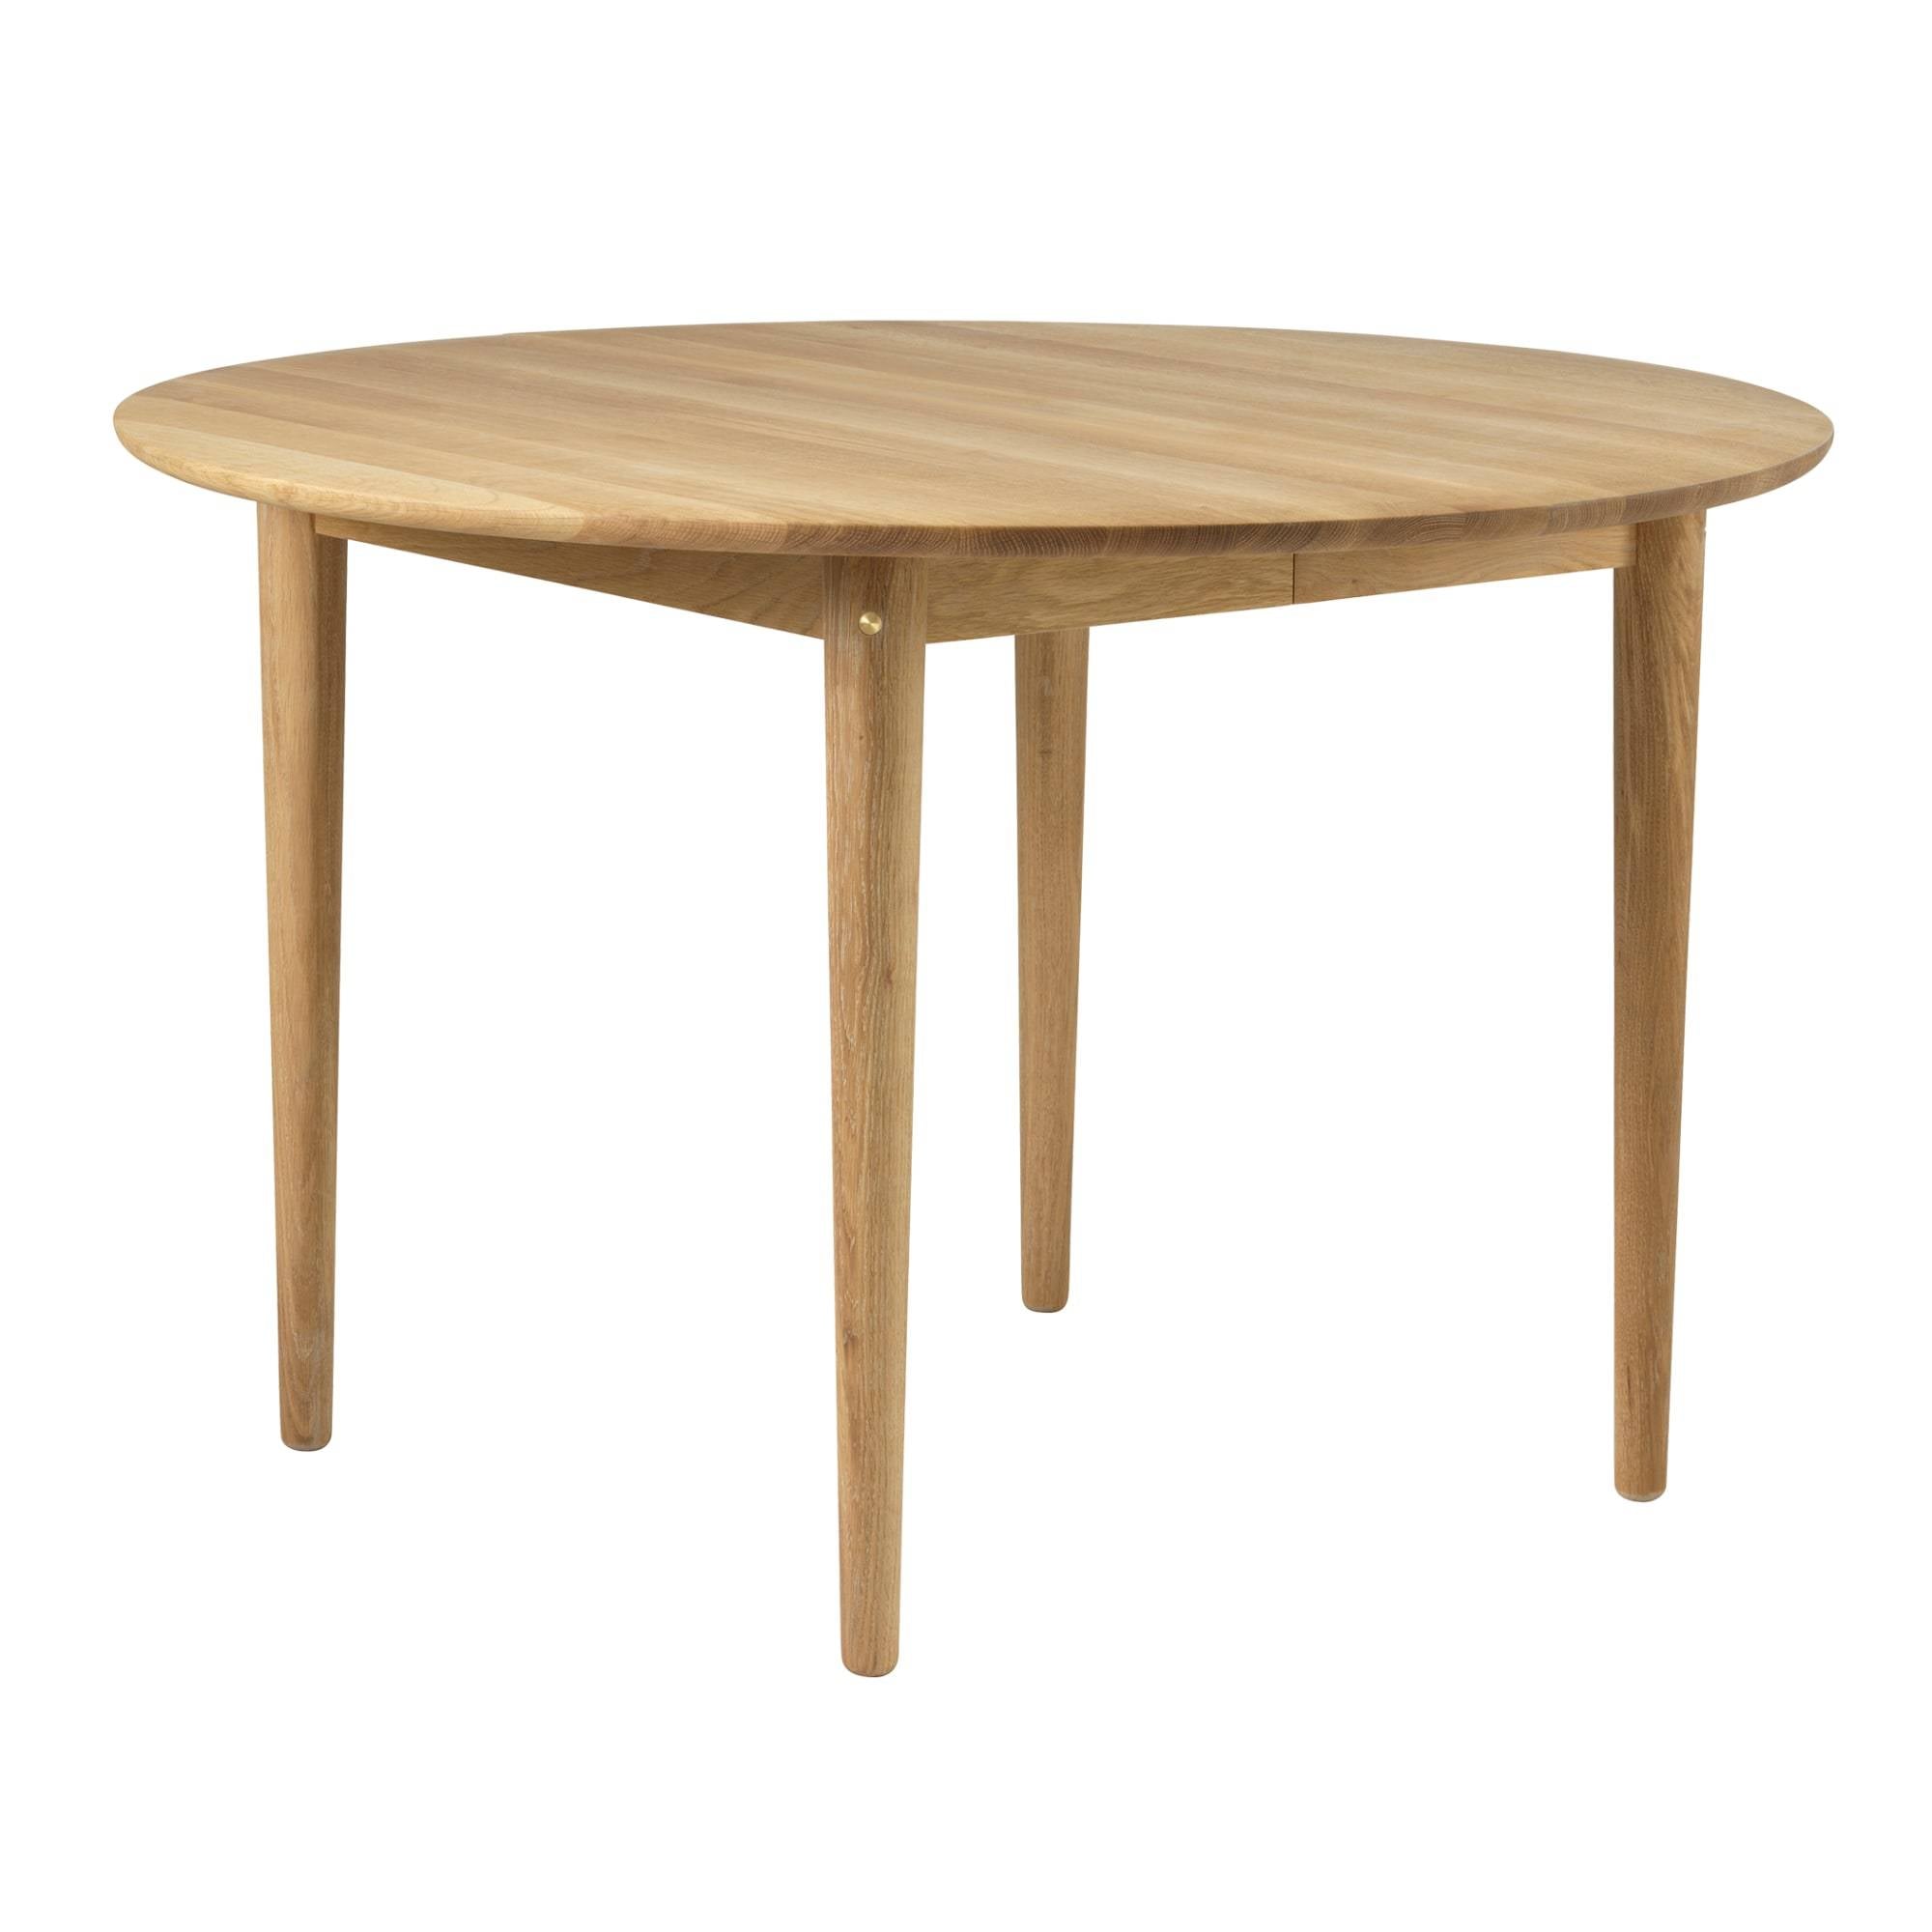 Fdb Møbler C62 E Dining Table With Pull Out Function, Oak